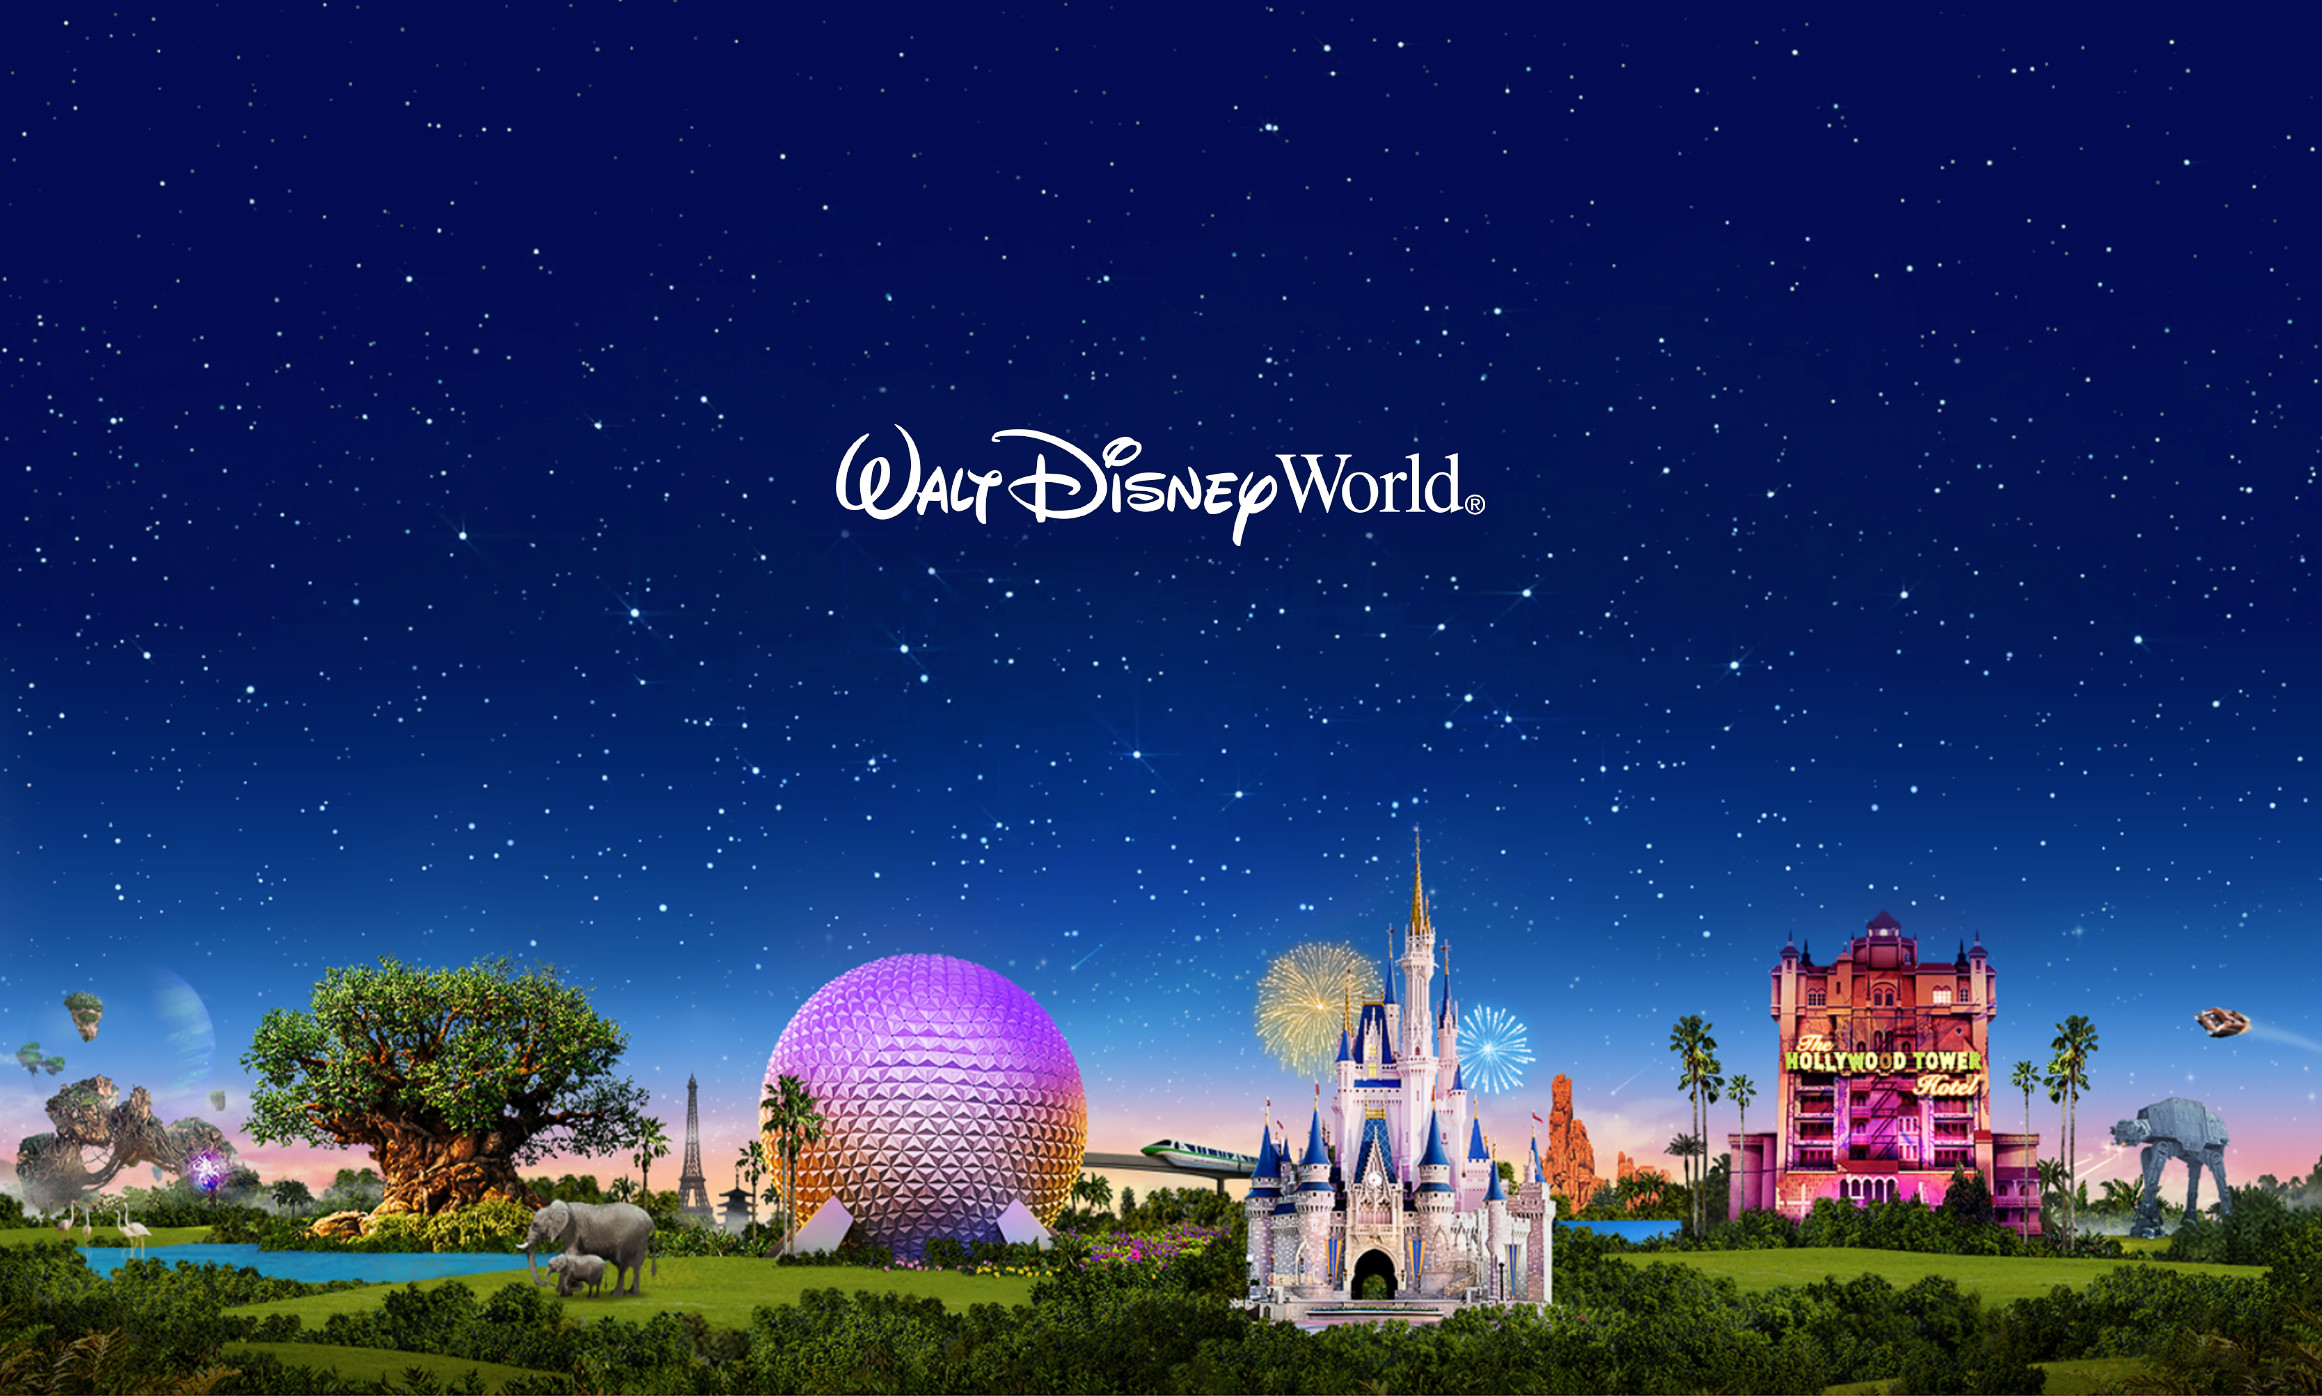 2322x1396 PhotoUpcoming Trip? Here is a Walt Disney World Desktop Wallpaper I made  (Based on the My Disney Experience image) ...